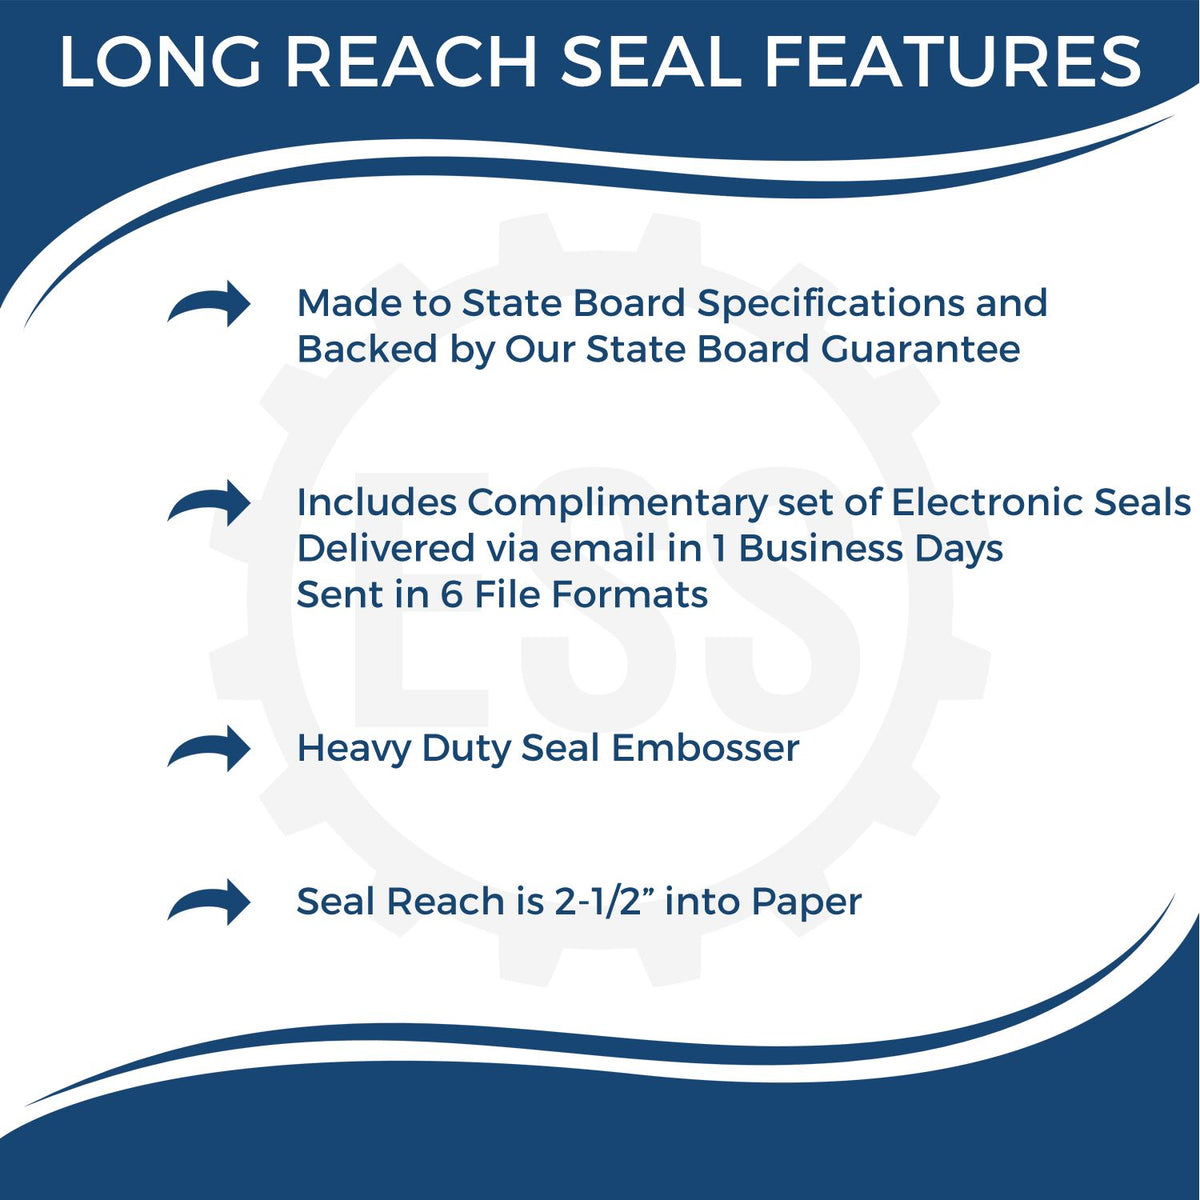 A picture of an infographic highlighting the selling points for the Long Reach Minnesota PE Seal